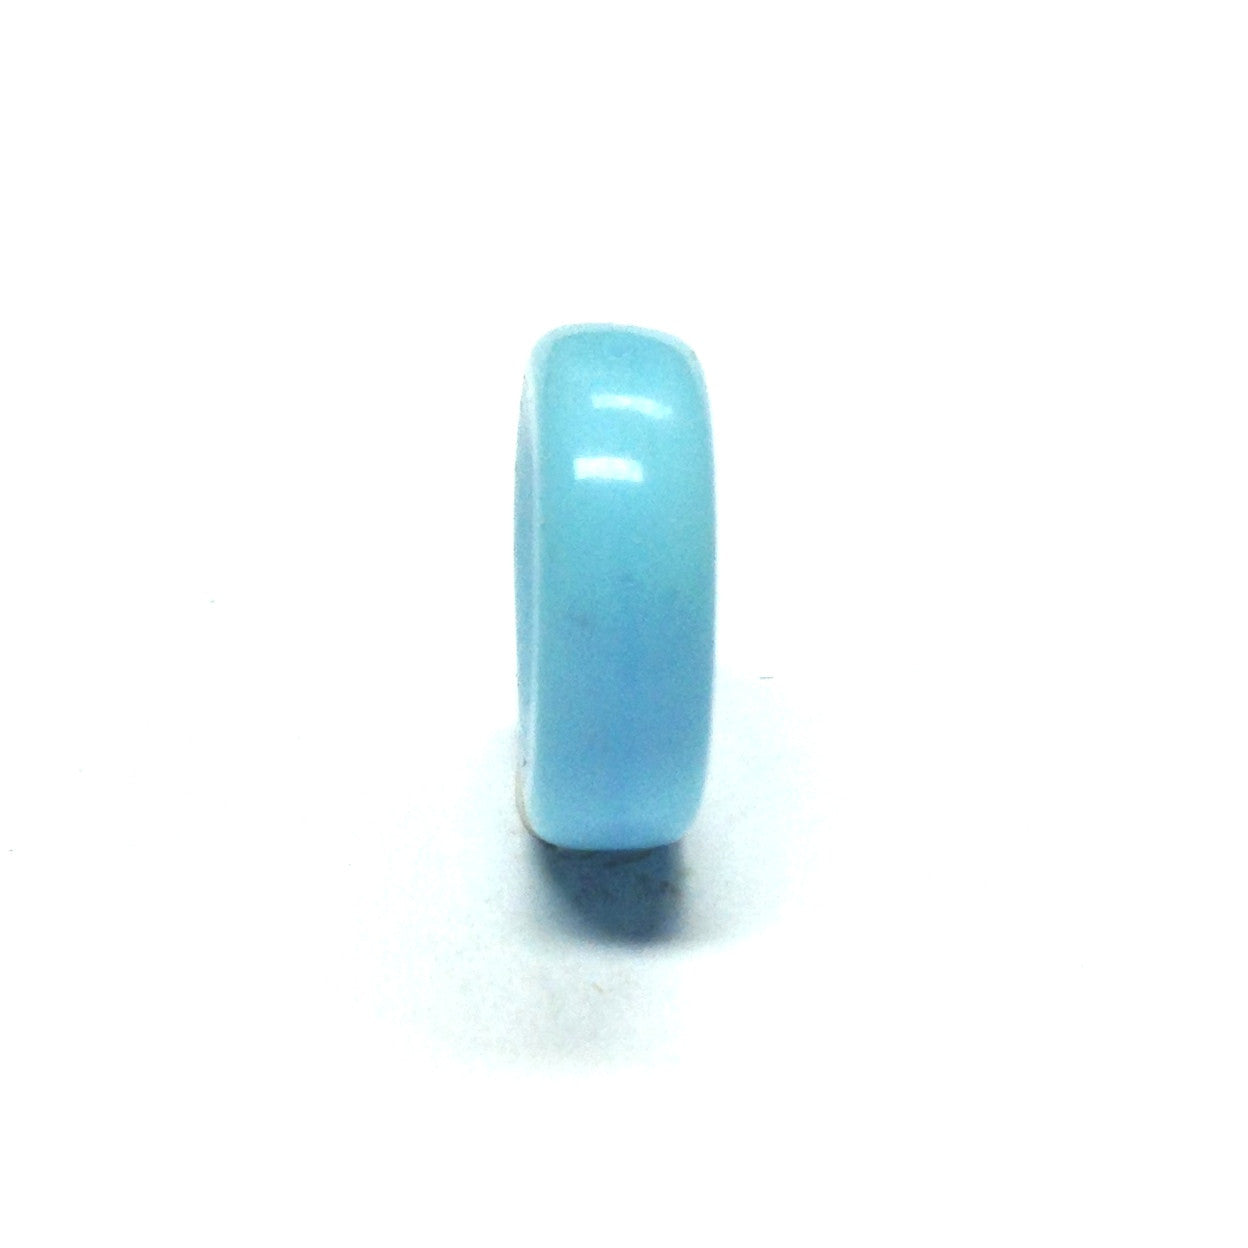 8MM Blue Turquoise Glass Rondel Bead (144 pieces)